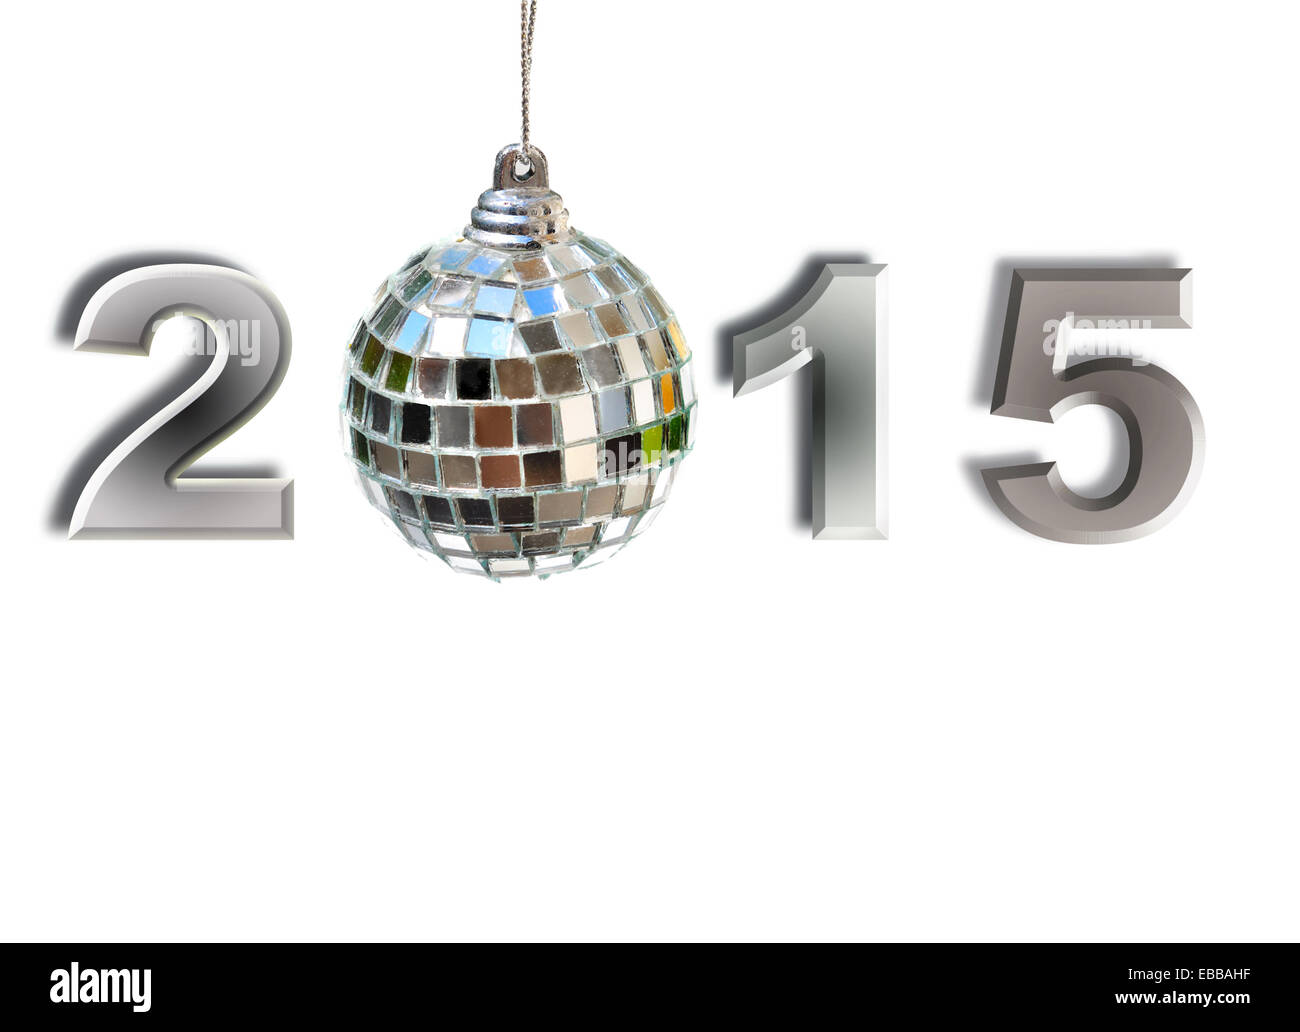 2015 with a disco ball and colors refections on white background Stock Photo